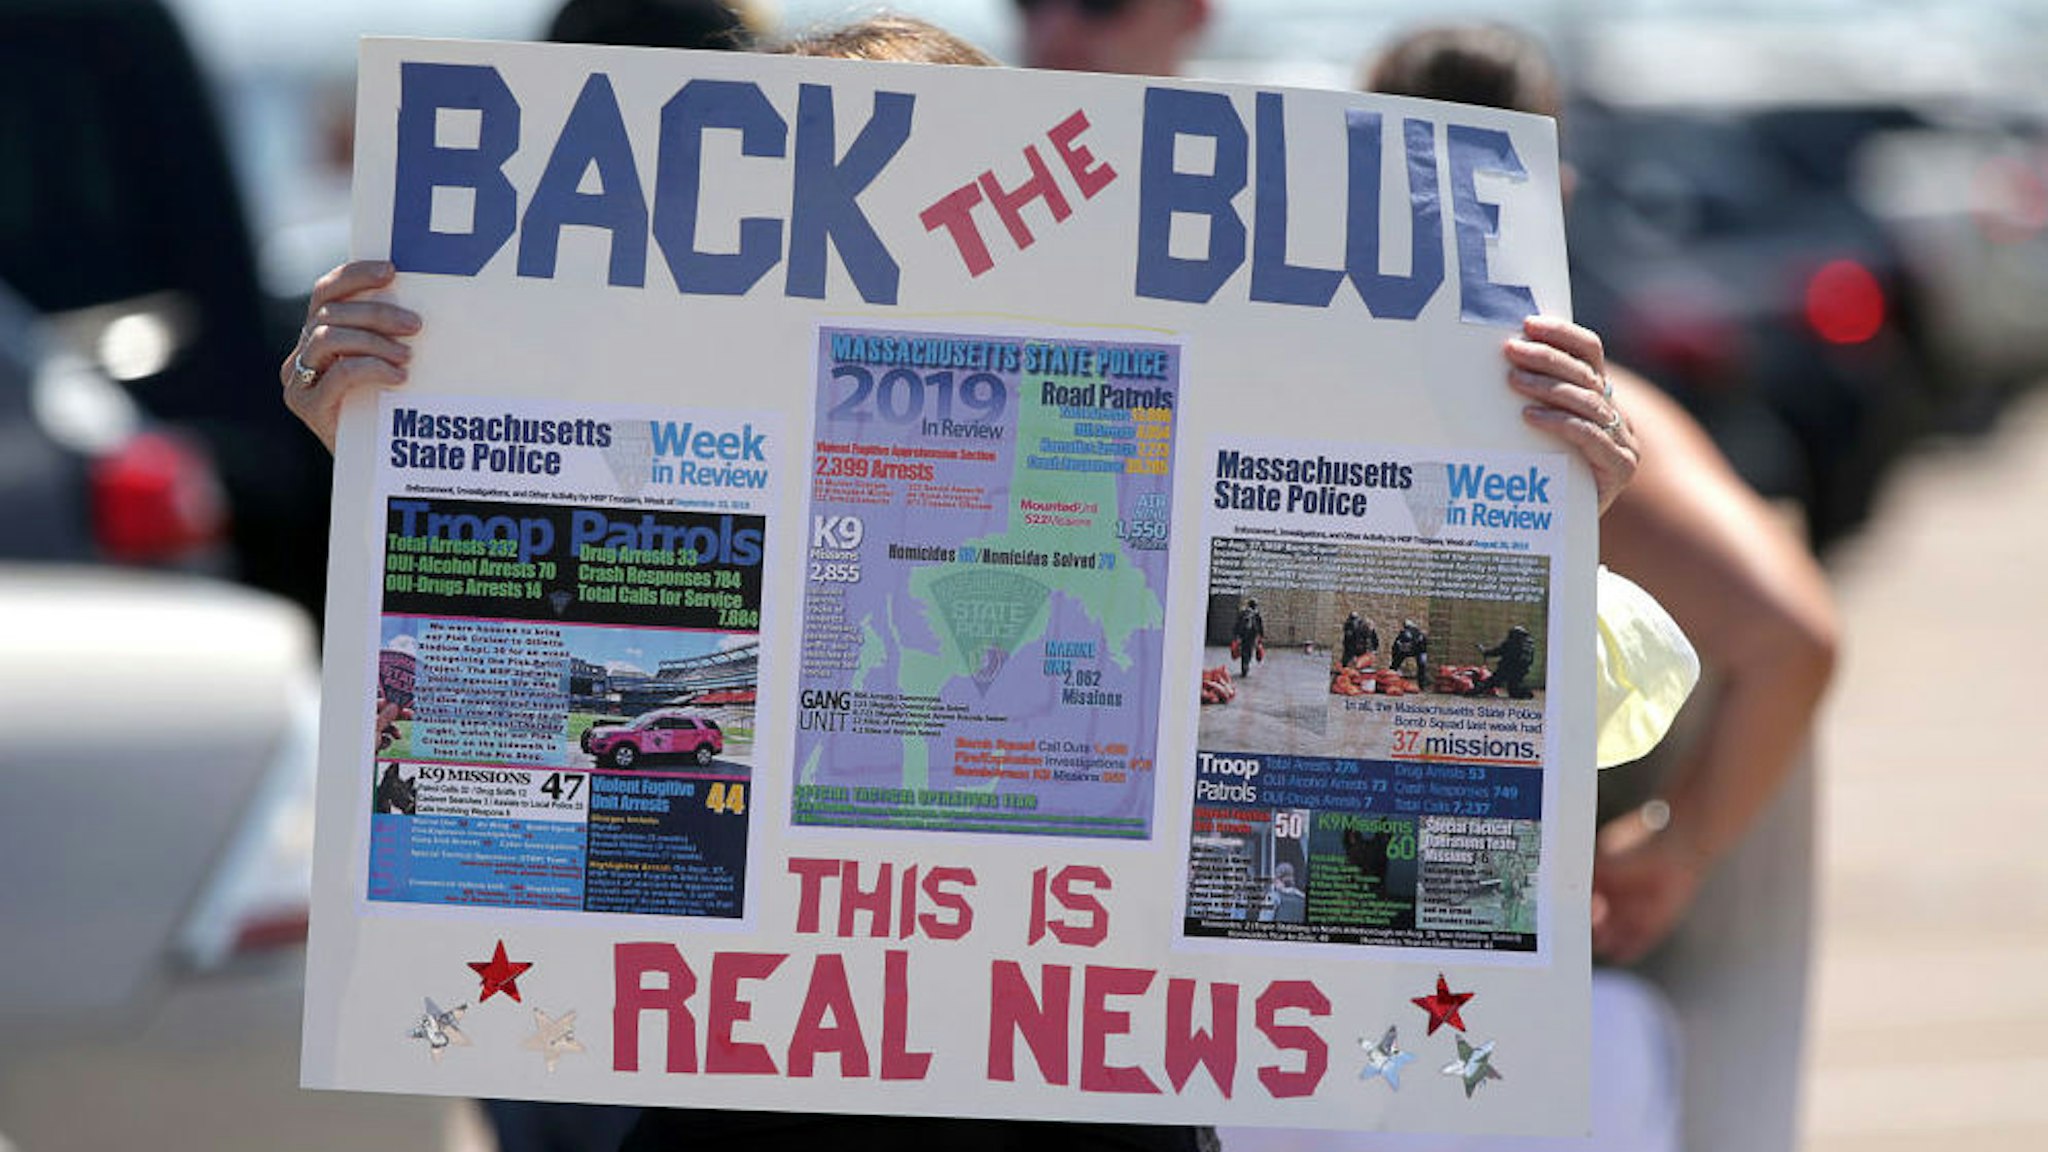 A sign posts "real news" and calls to "back the blue" at a Back the Blue rally in support of police departments on Quincy Shore Drive in Quincy, MA on June 20, 2020.